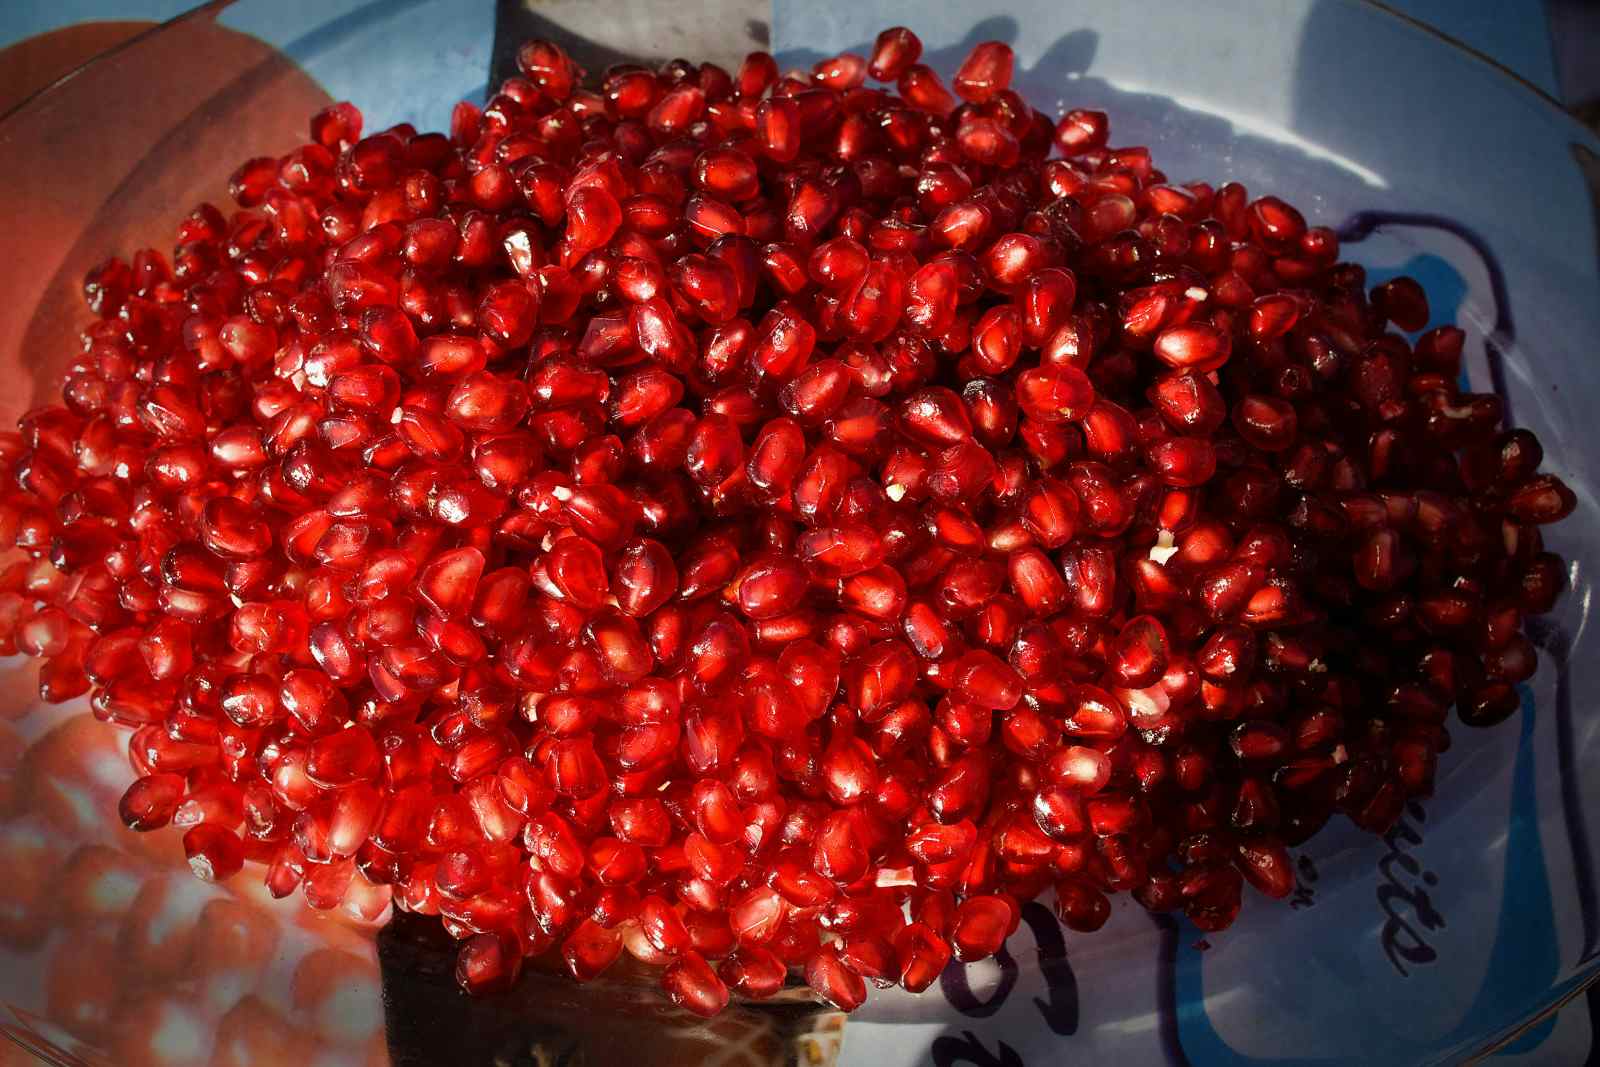 OCTOBER 15, 2009: Pomegranates seeds are displayed at the Omaid Bahar Fruit Processing Company in Kabul, Afghanistan. The new $11 million factory has contracts for juice concentrate and whole fruits with major buyers in India, the Gulf, Europe, and America (Paula Bronstein/Getty Images)